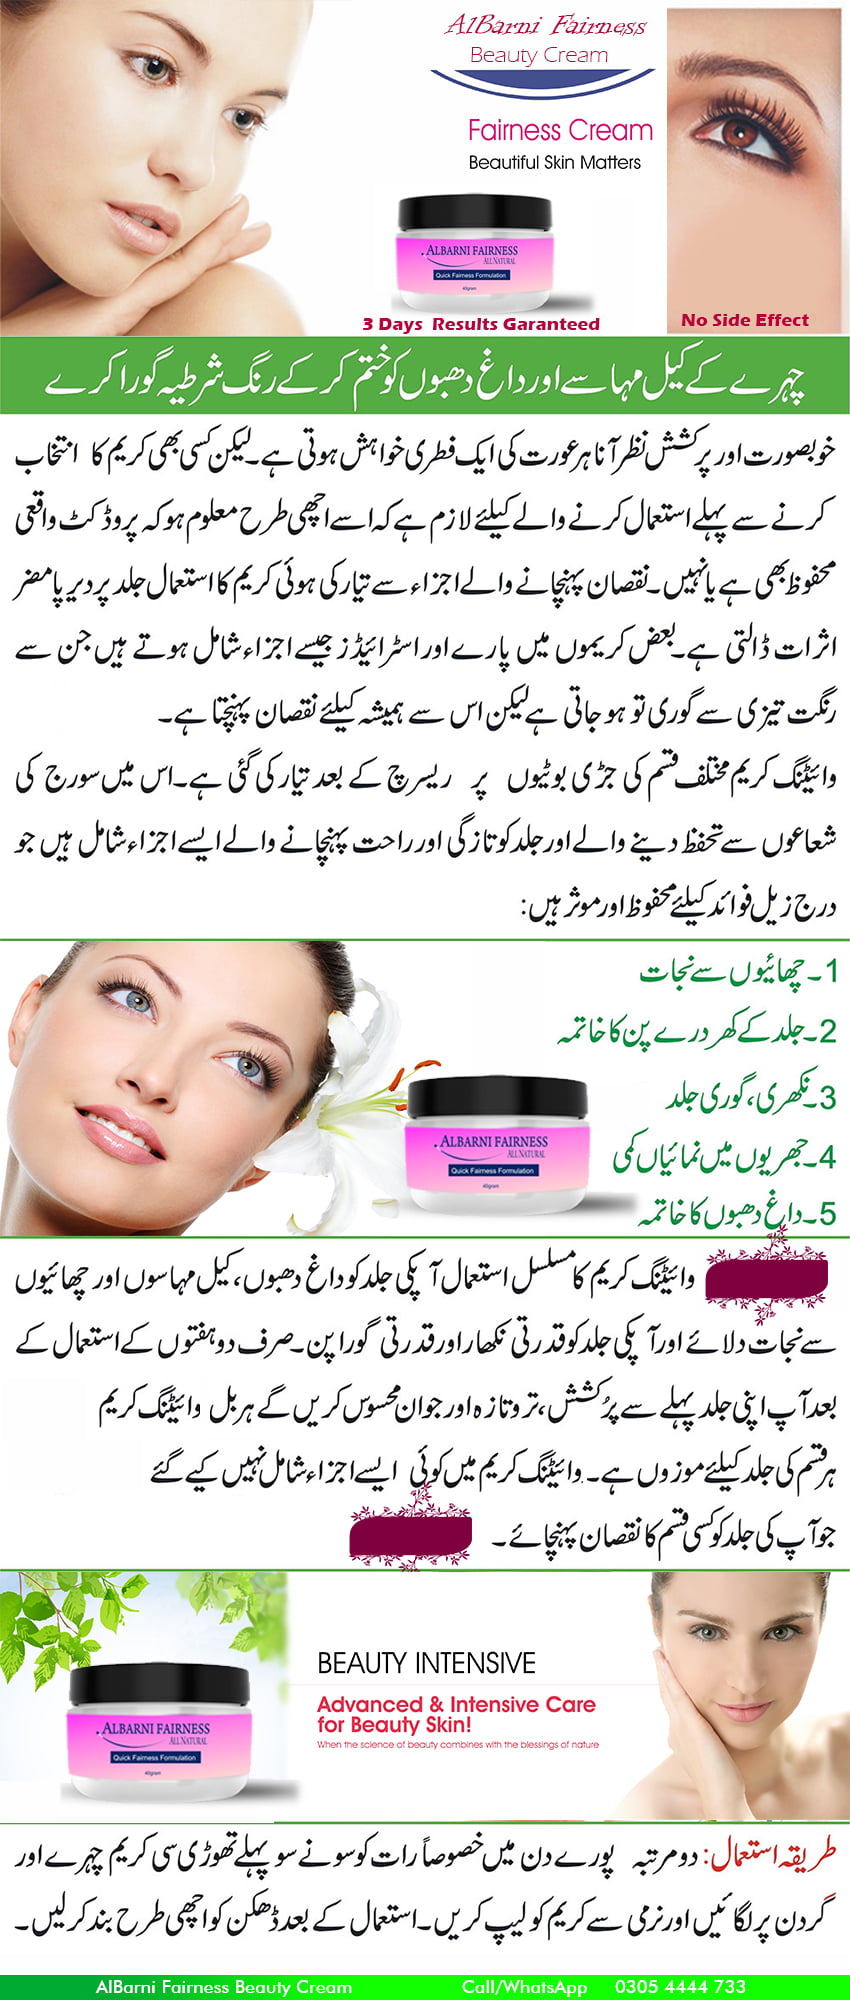 herbal whitening cream in Pakistan, most effective whitening cream in Pakistan, best whitening night cream for oily skin in Pakistan, medicated whitening cream in Pakistan, best skin whitening cream in Pakistan, rang gora karne wali cream in Pakistan, whitening cream price in Pakistan